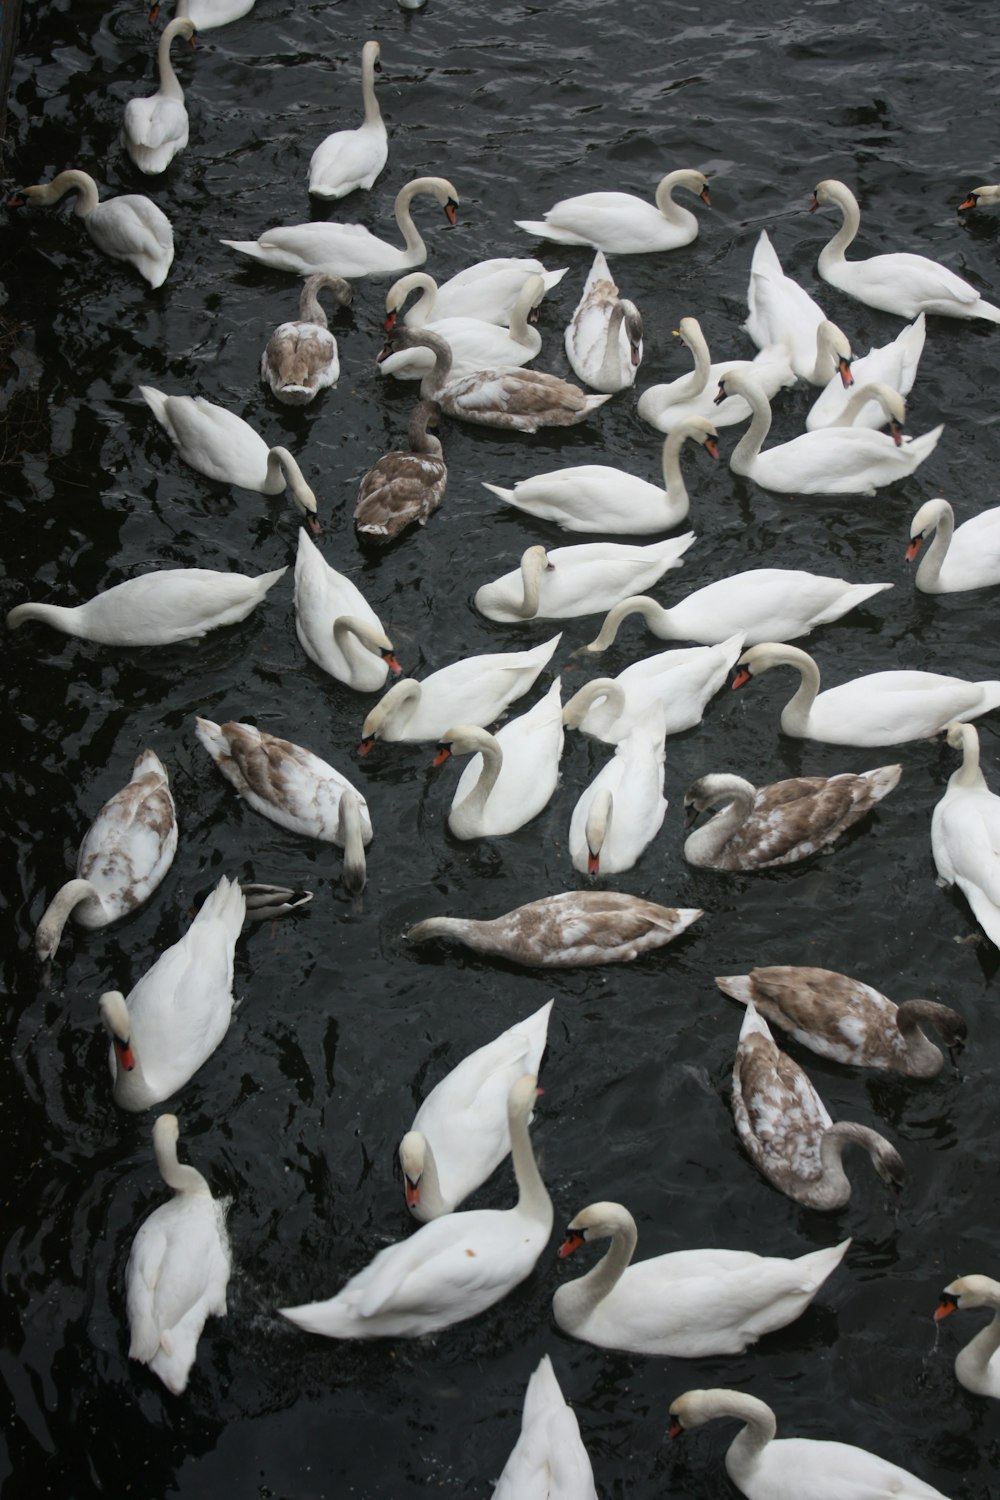 a flock of ducks floating on top of a body of water